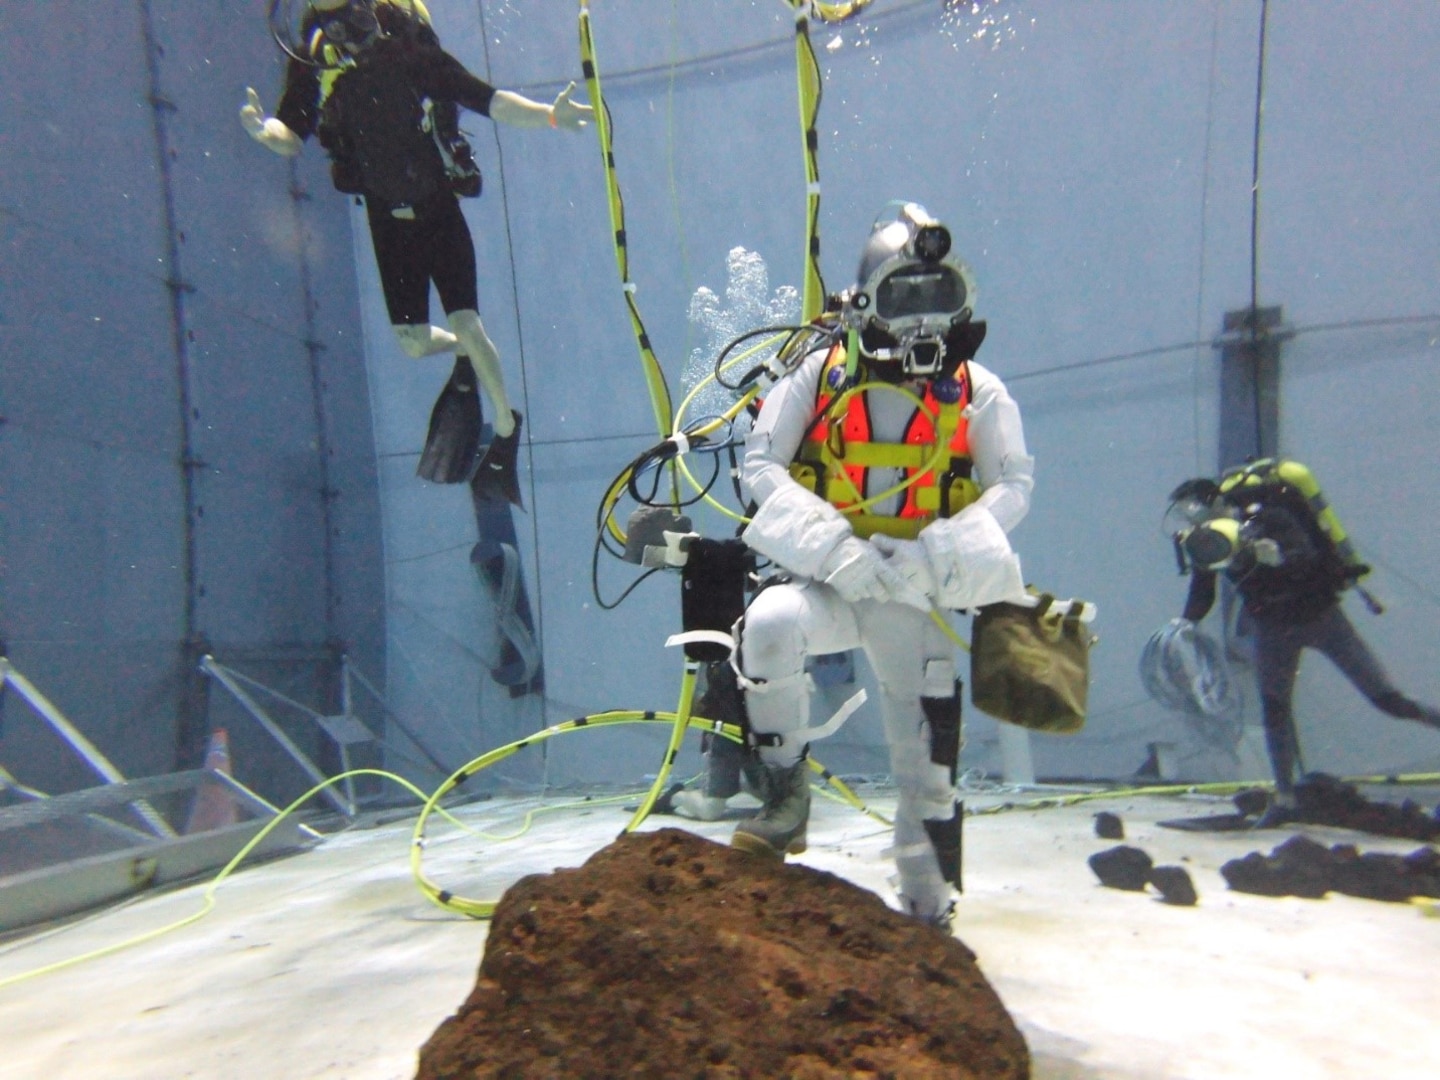 SUPSALV Master Diver NDCM John D. Hopkins testing the DAVD system 40-feet below the surface in NASA’s Sonny Carter Training Facility’s Neutral Buoyancy Laboratory in Houston, TX.